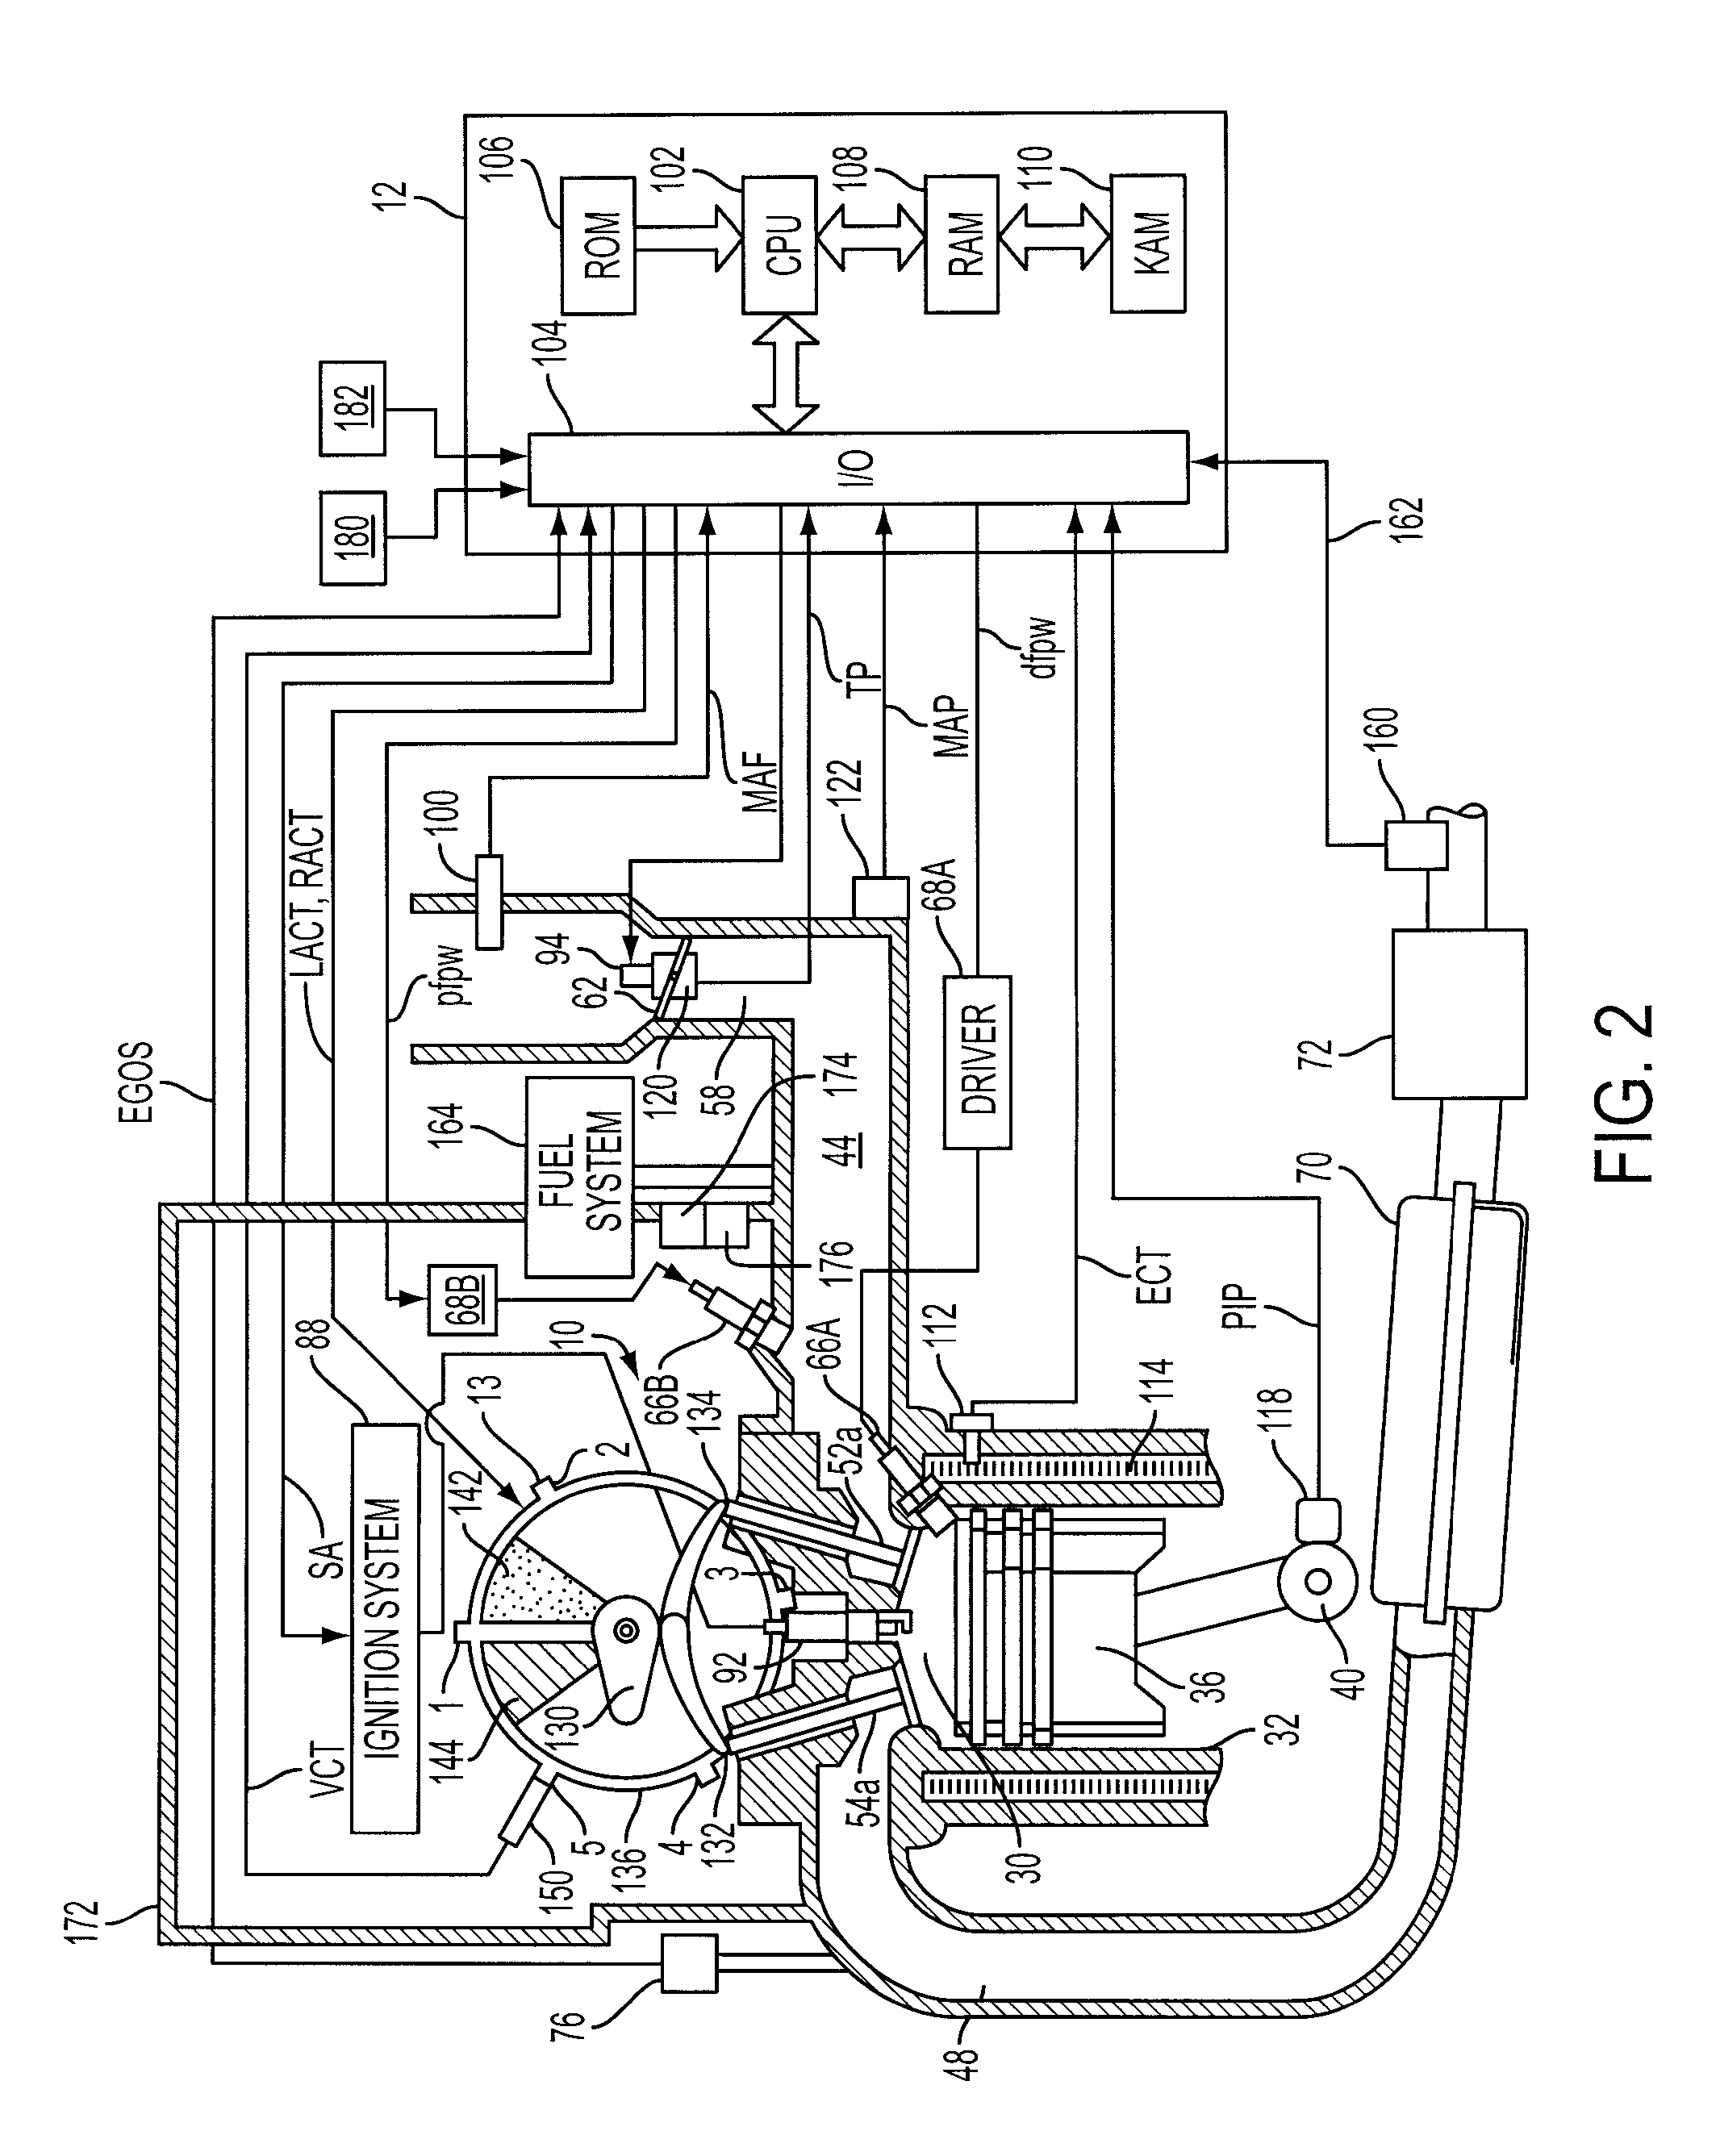 Apparatus with Mixed Fuel Separator and Method of Separating a Mixed Fuel